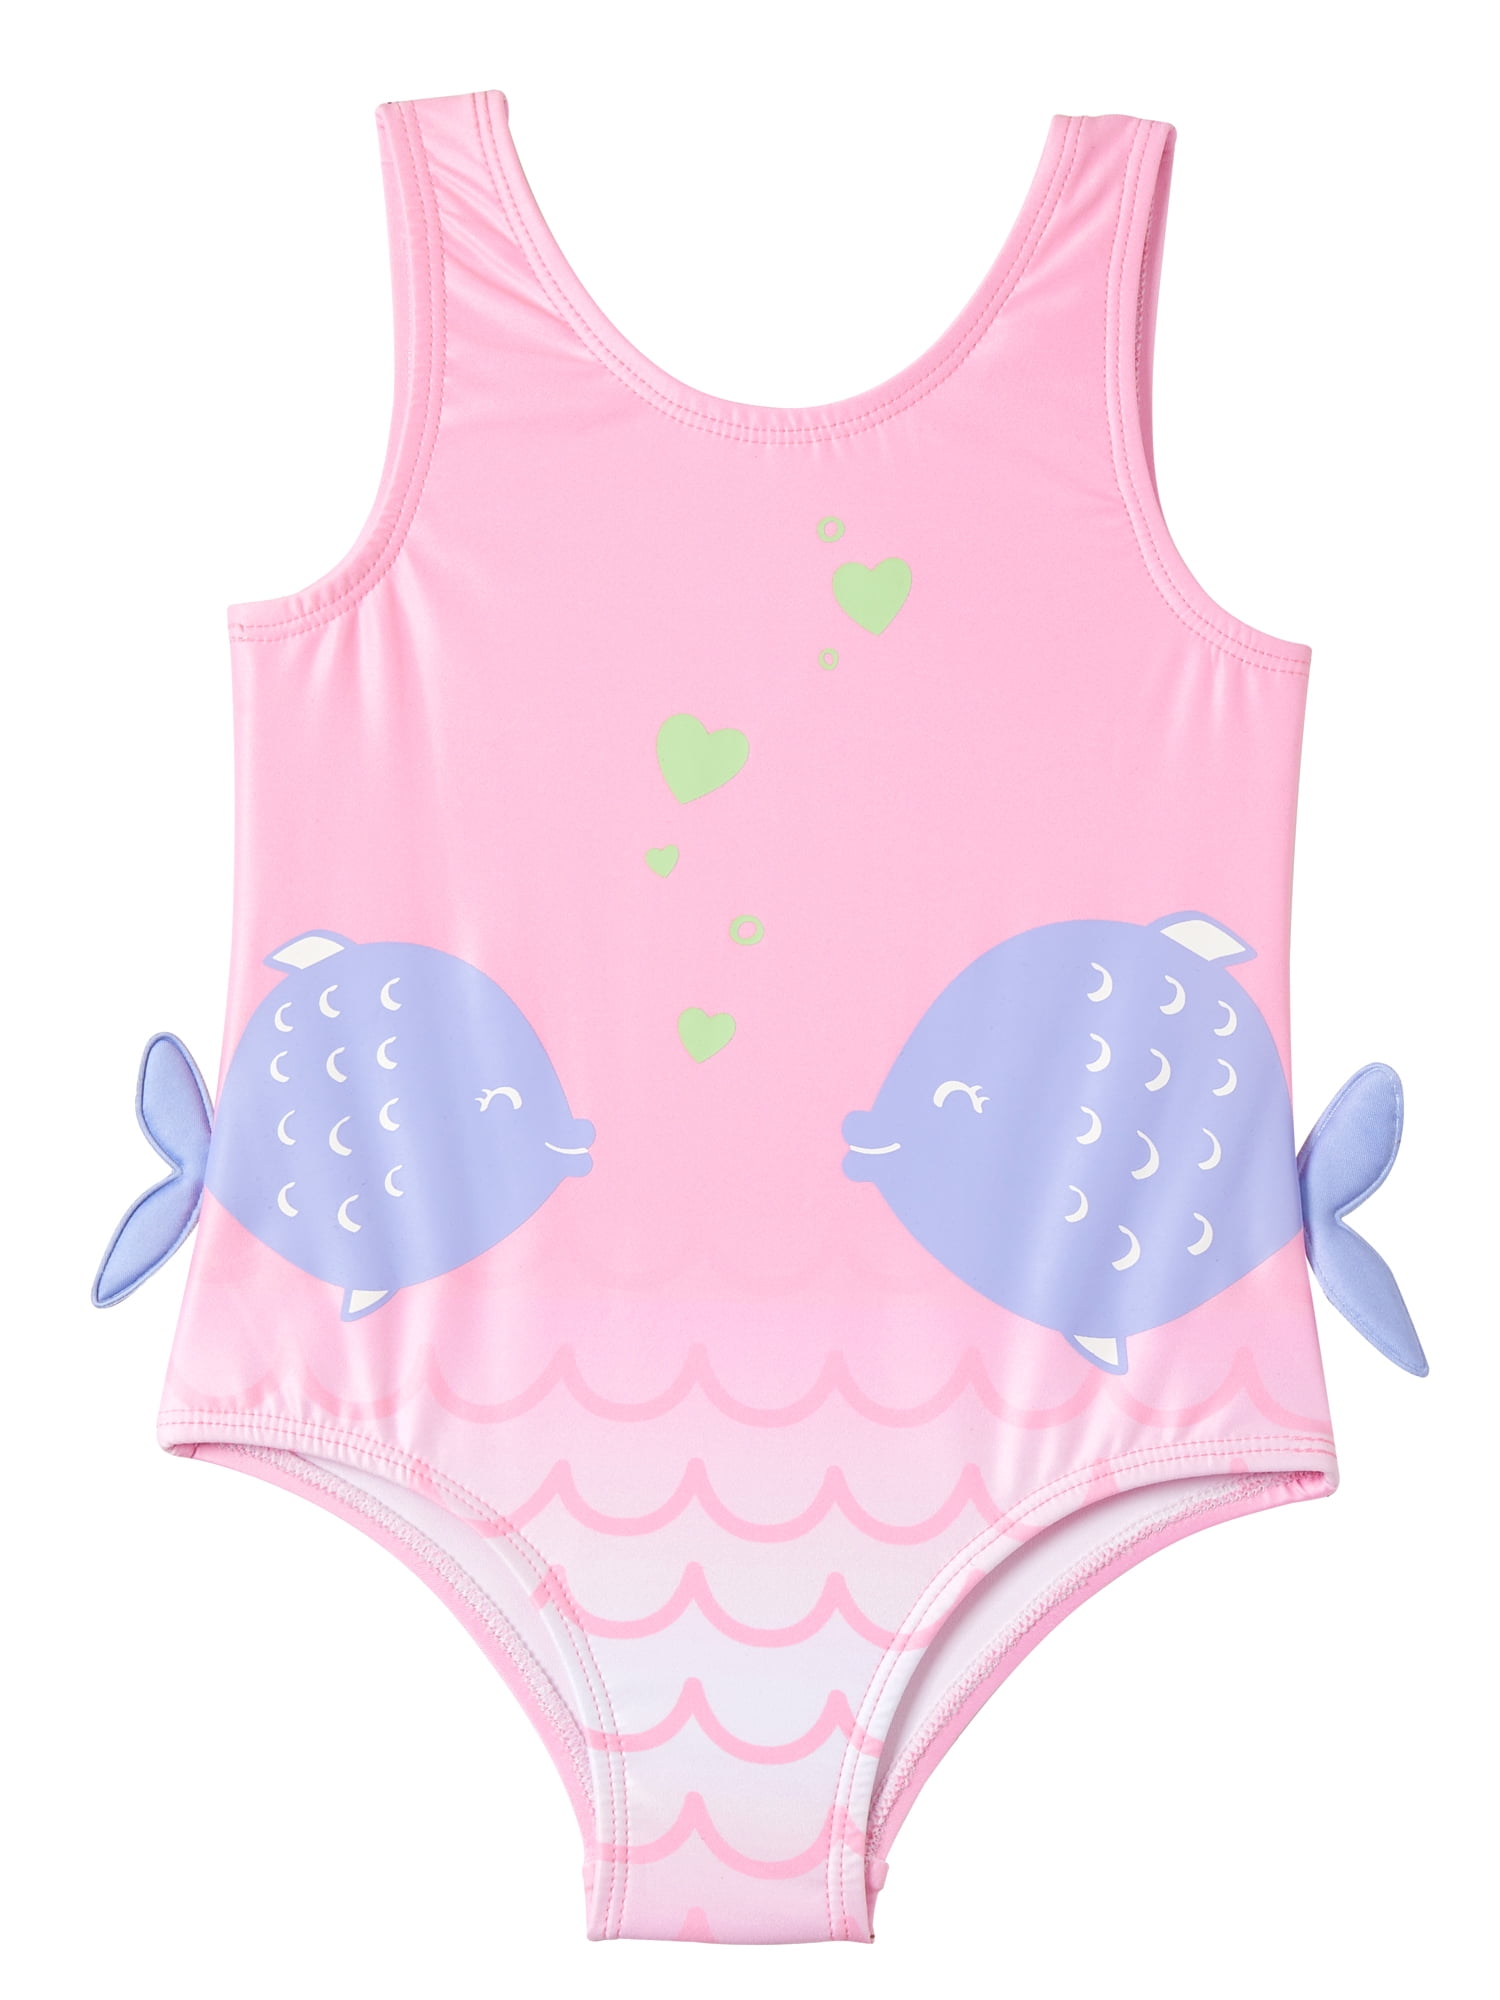 New PINK PLATINUM Toddler Girls Sizes 2T 3T 4T One-Piece Bathing Suits Blue Foil 